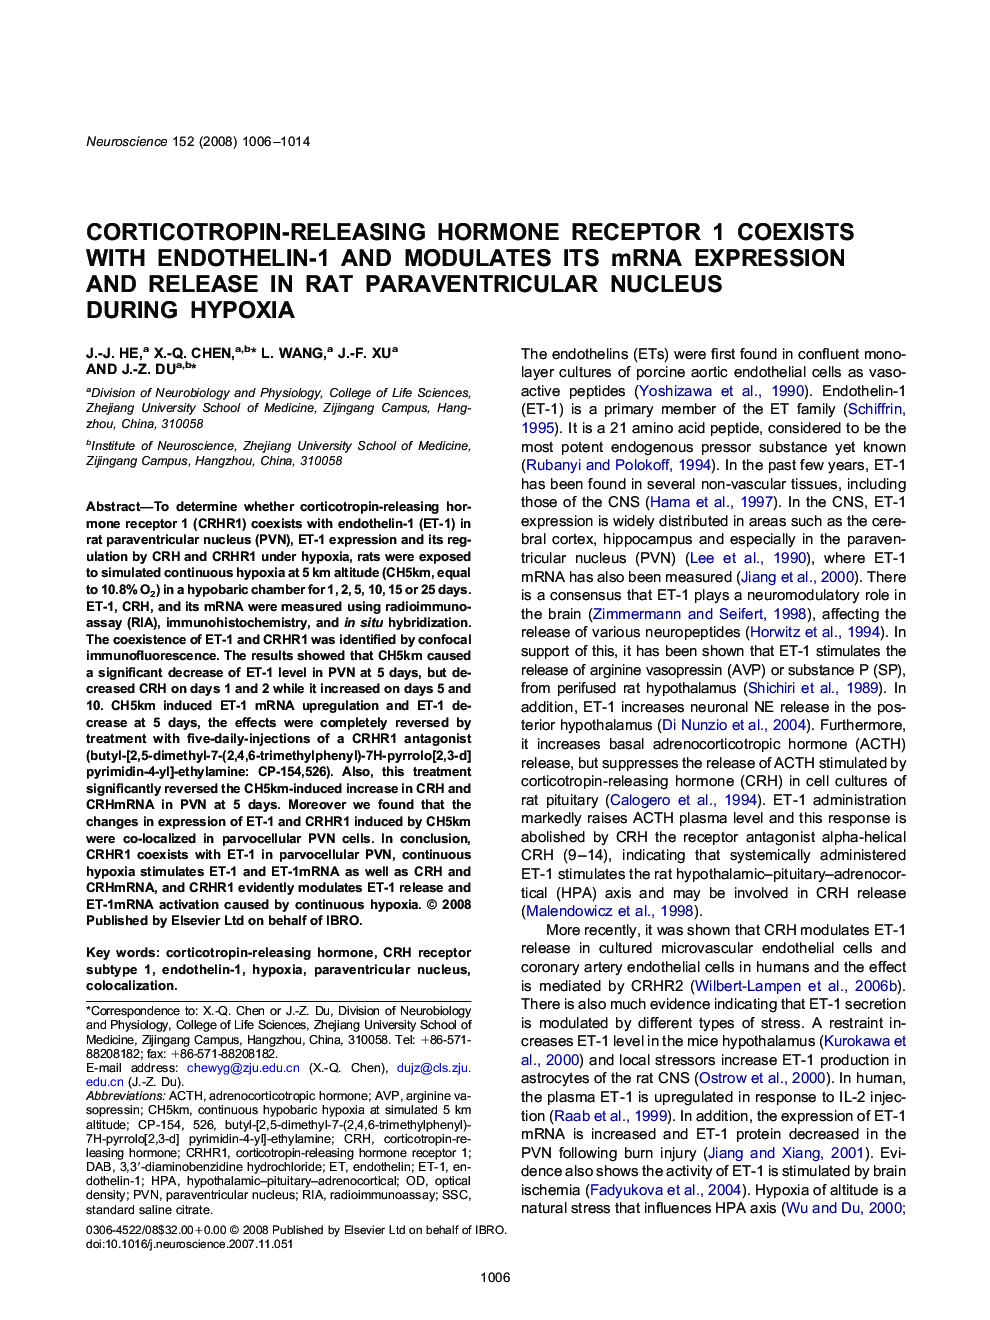 Corticotropin-releasing hormone receptor 1 coexists with endothelin-1 and modulates its mRNA expression and release in rat paraventricular nucleus during hypoxia